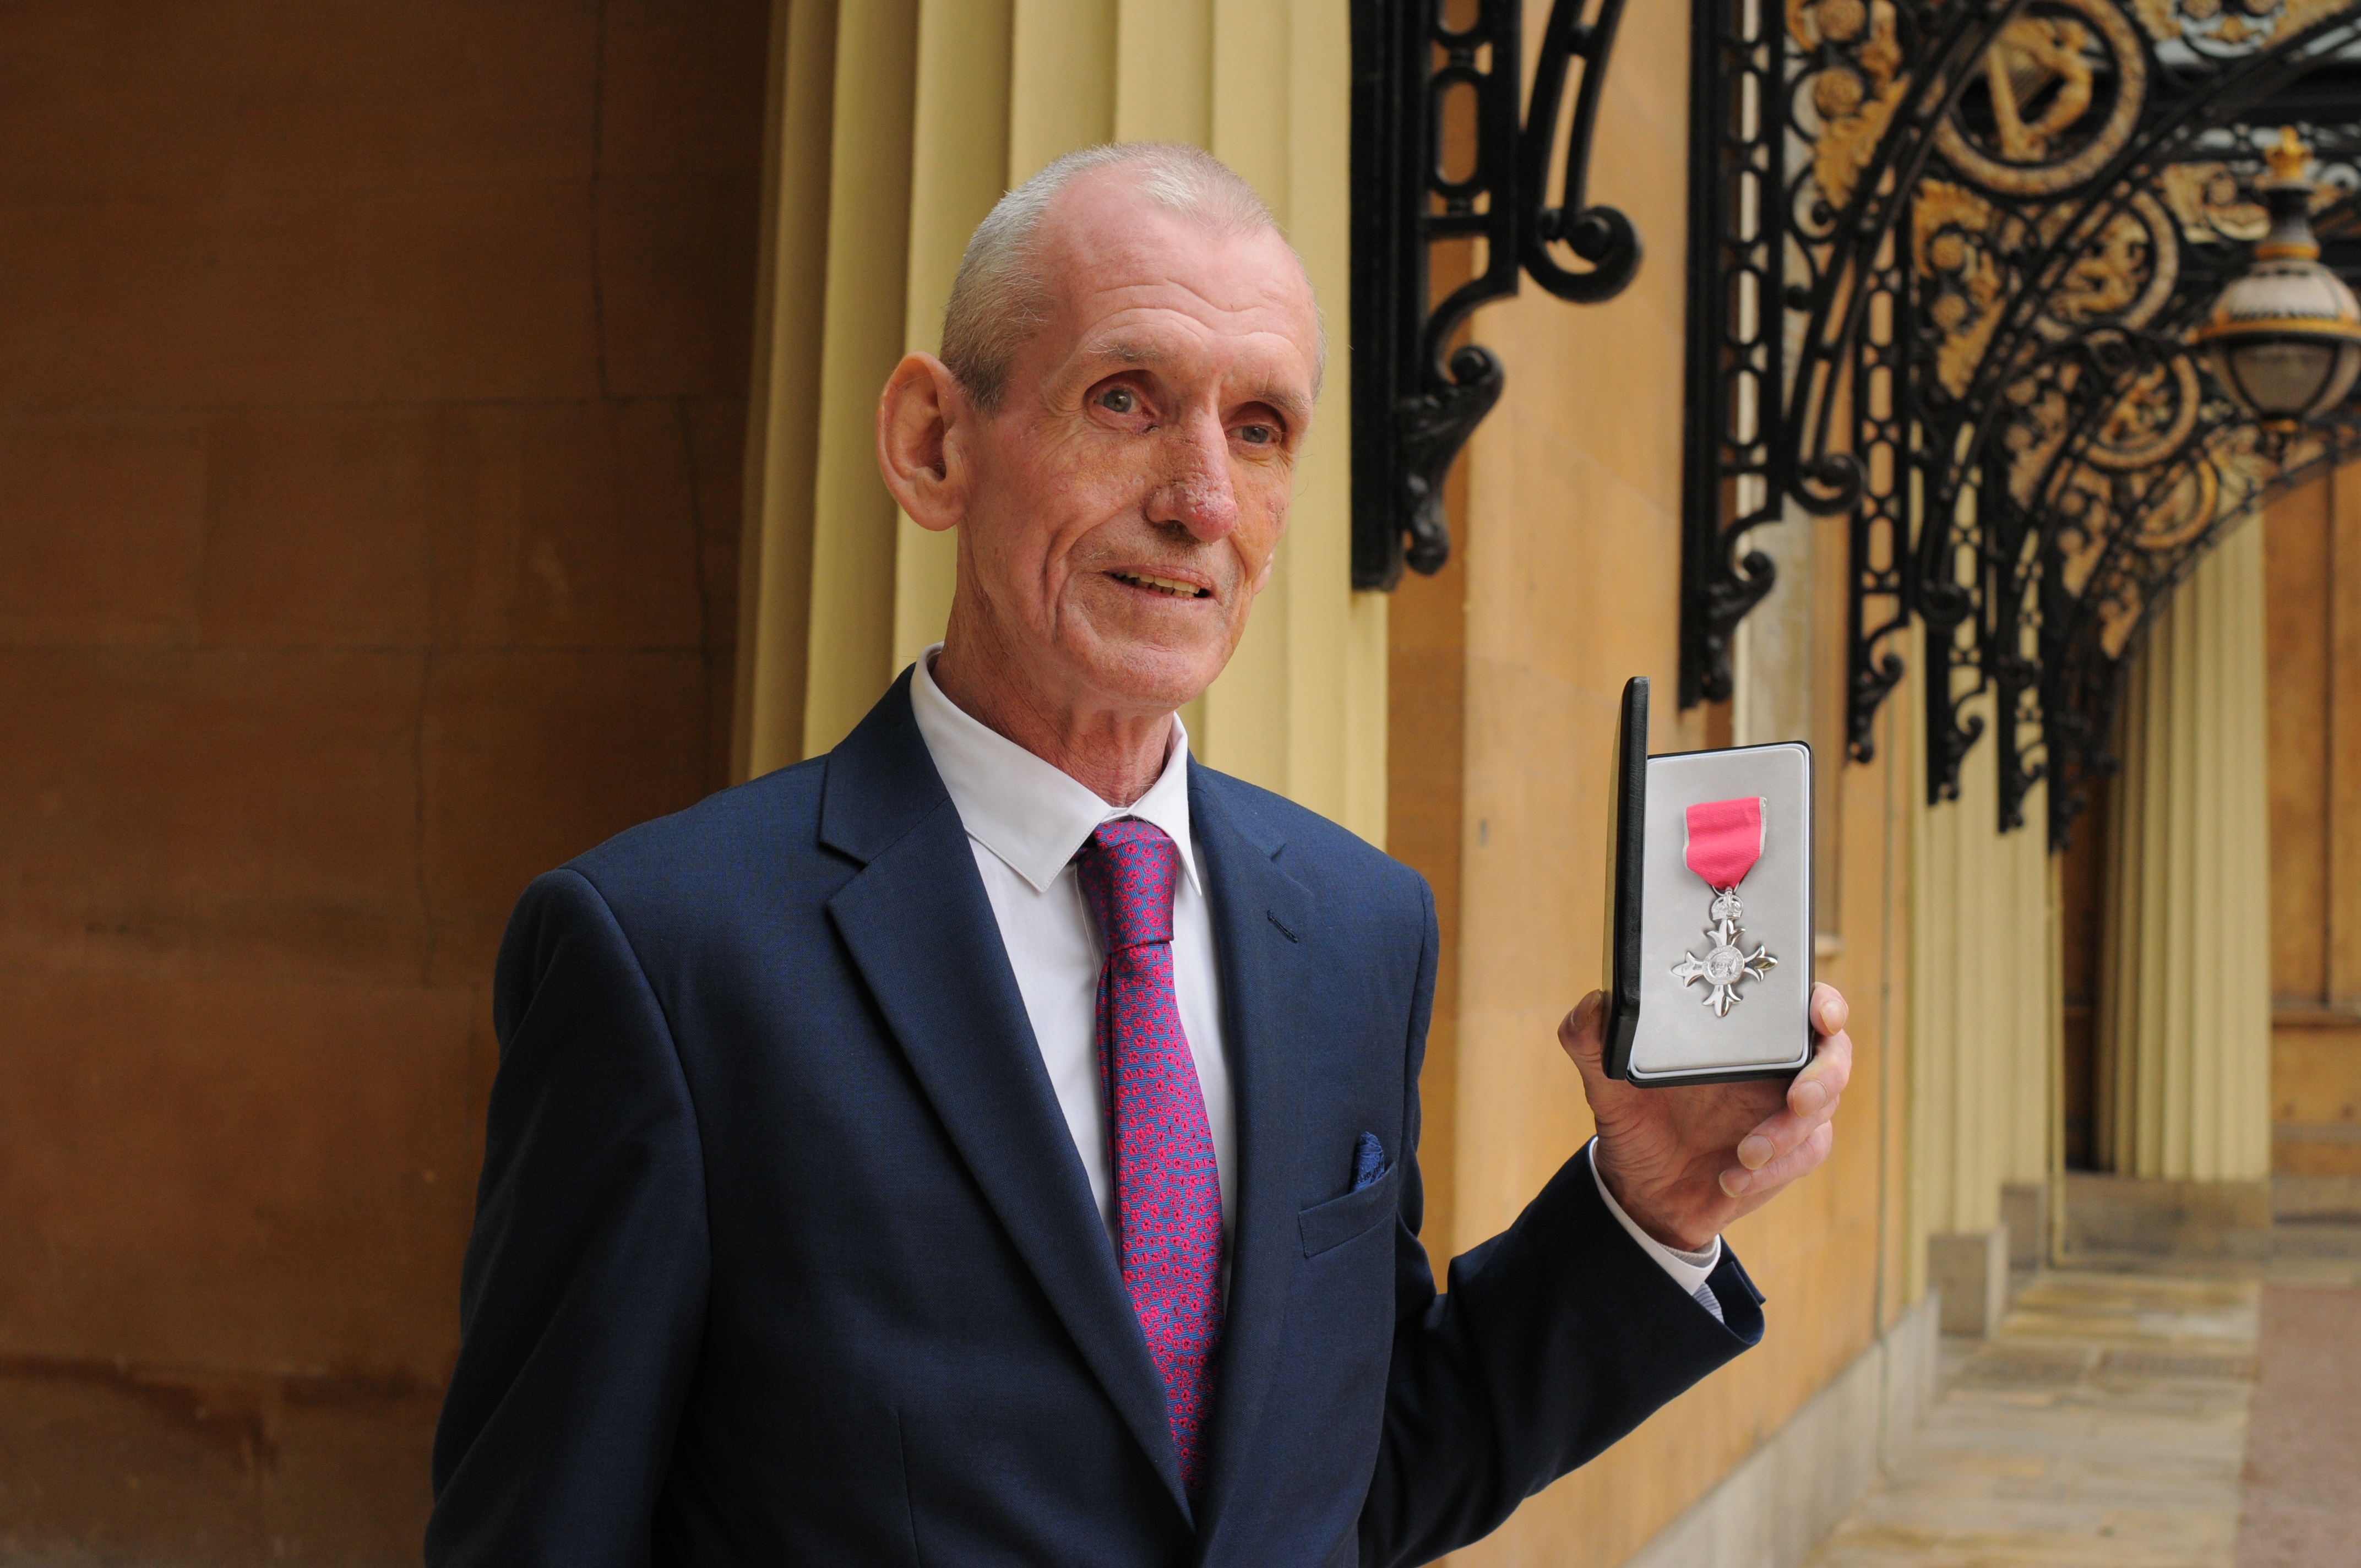 Dennis Rogers with his MBE medal